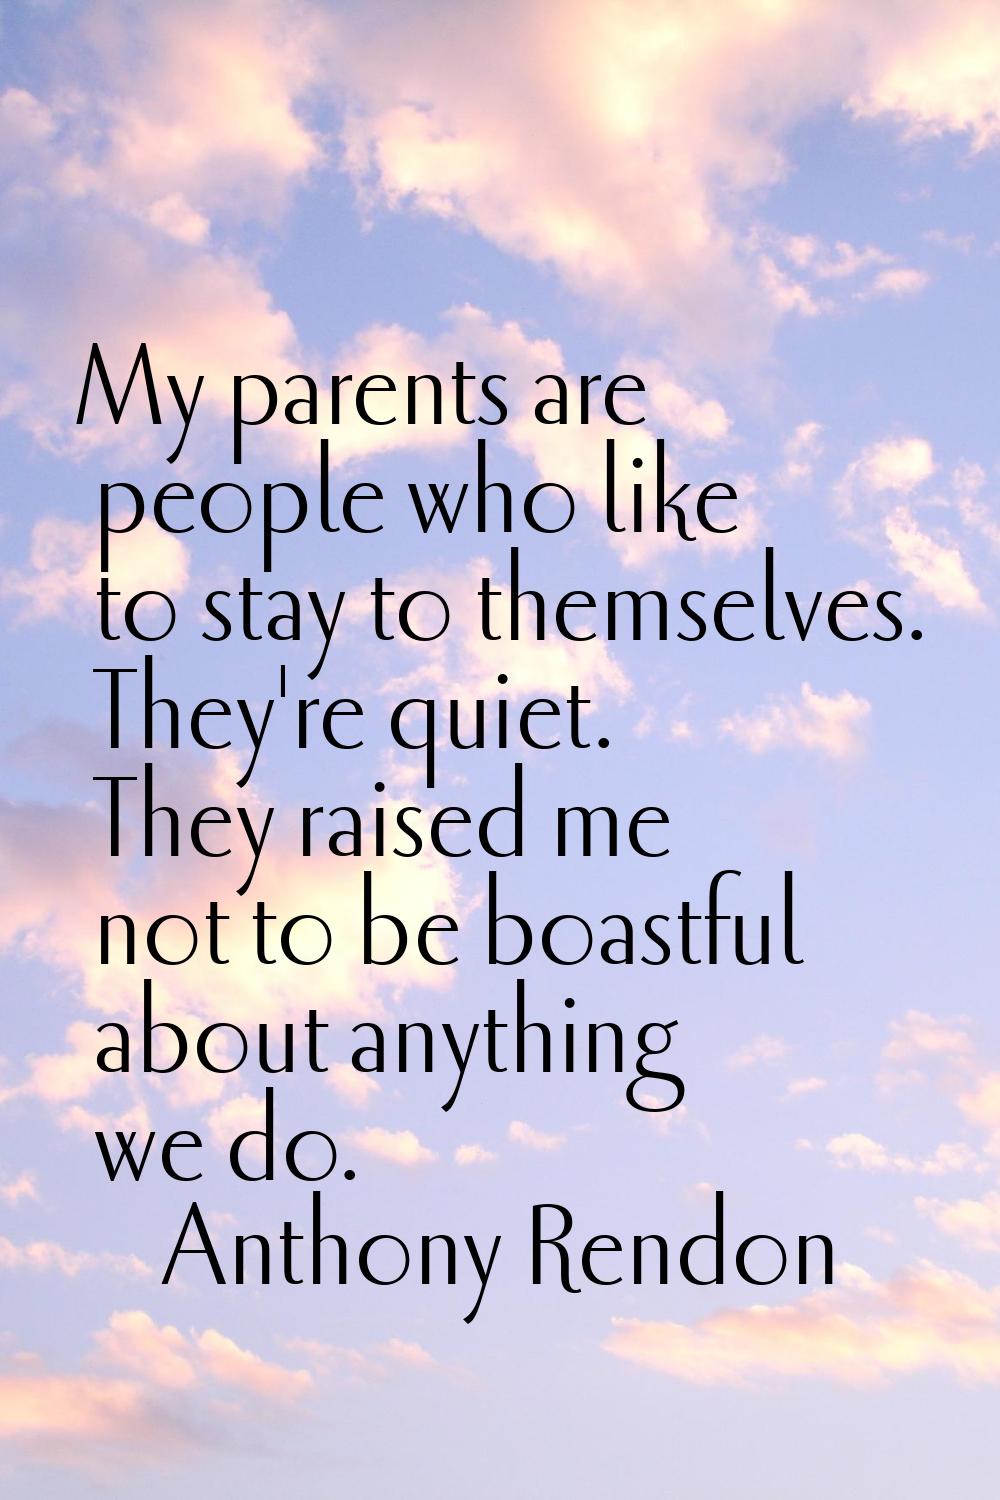 My parents are people who like to stay to themselves. They're quiet. They raised me not to be boast